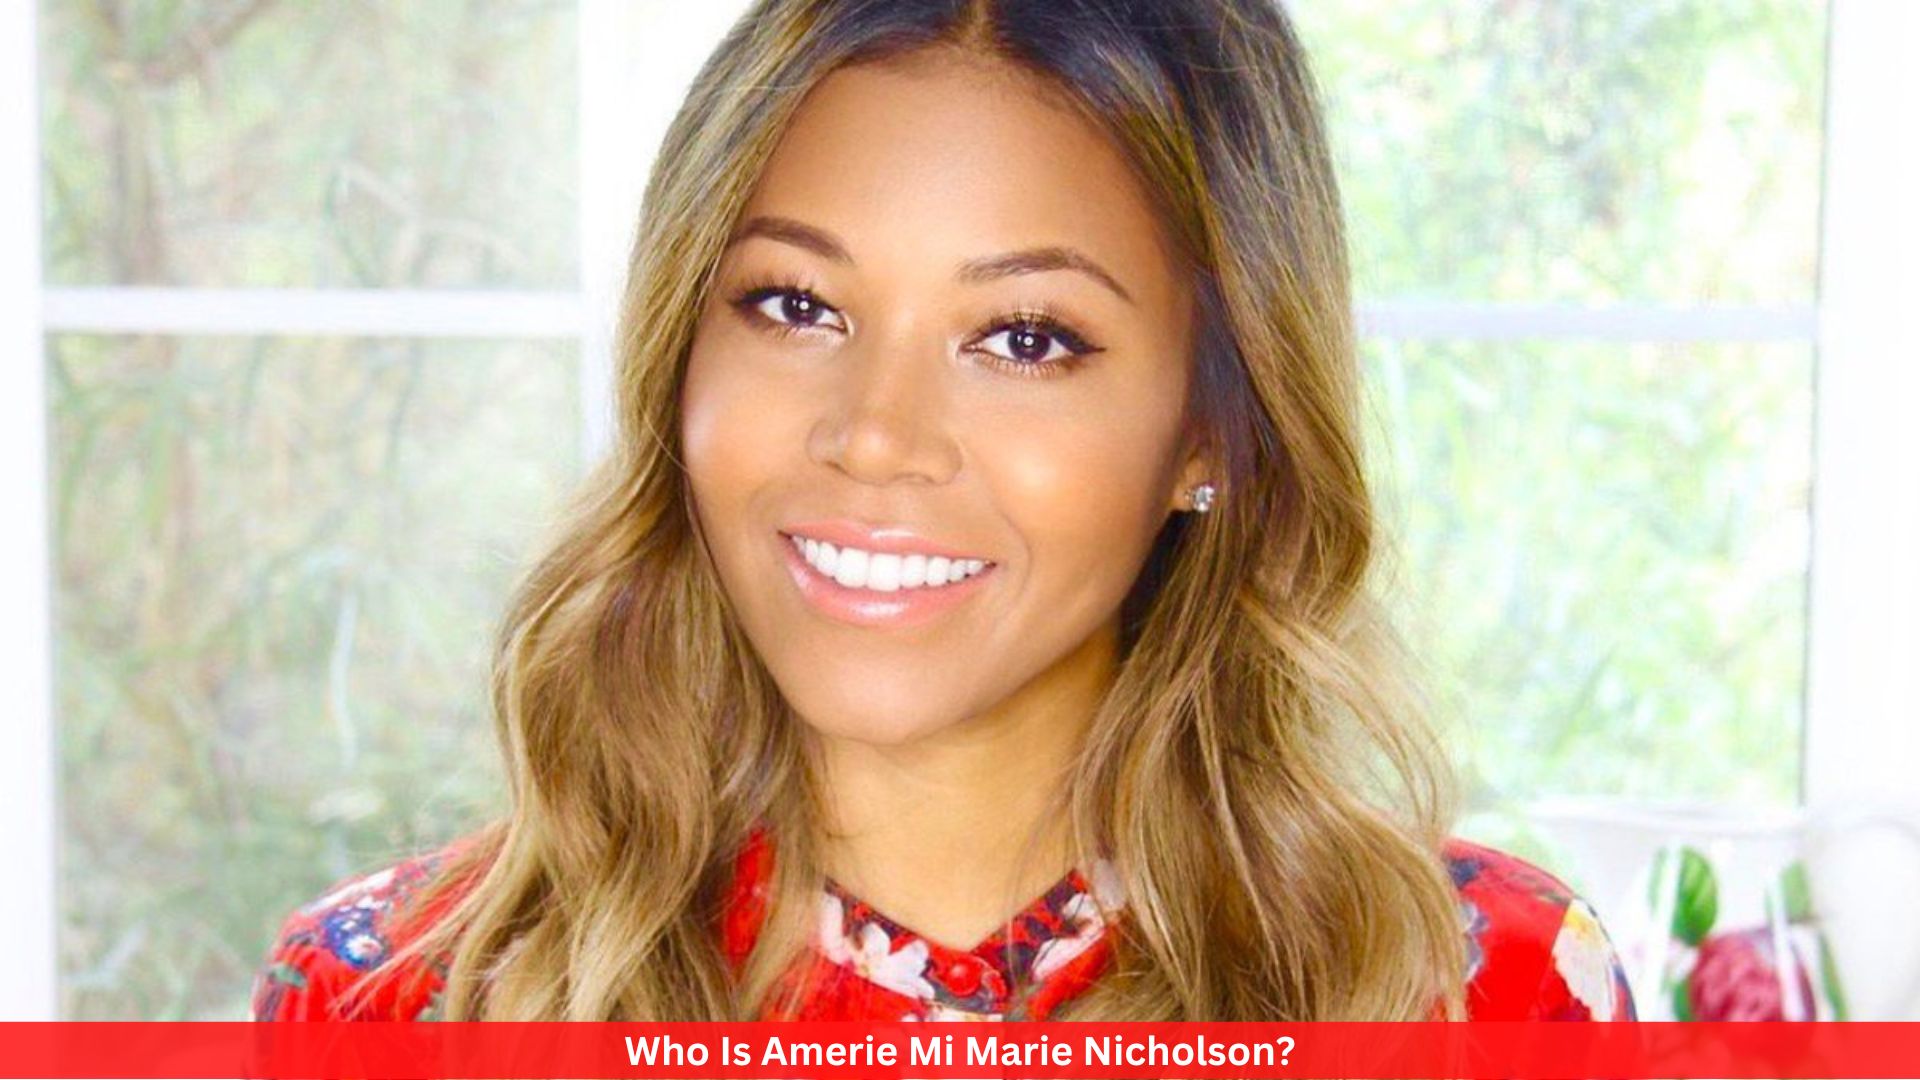 Who Is Amerie Mi Marie Nicholson? Know All About Her Life!